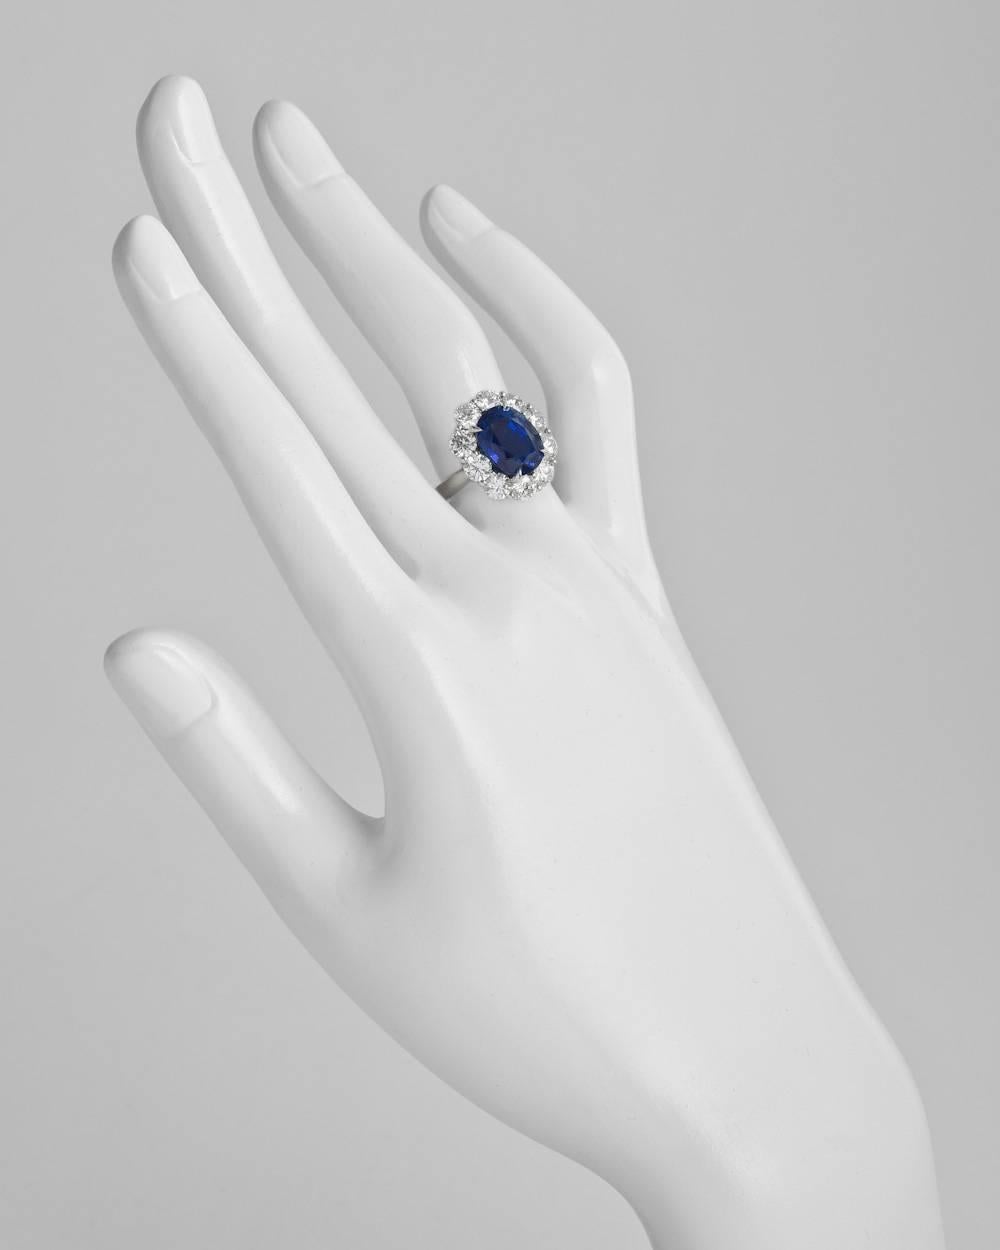 Sapphire and diamond cluster ring, centering a natural oval-shaped sapphire weighing 5.45 carats, with a round brilliant cut diamond surround, the ten diamonds weighing approximately 2.23 total carats, mounted in platinum. Accompanied by the GIA